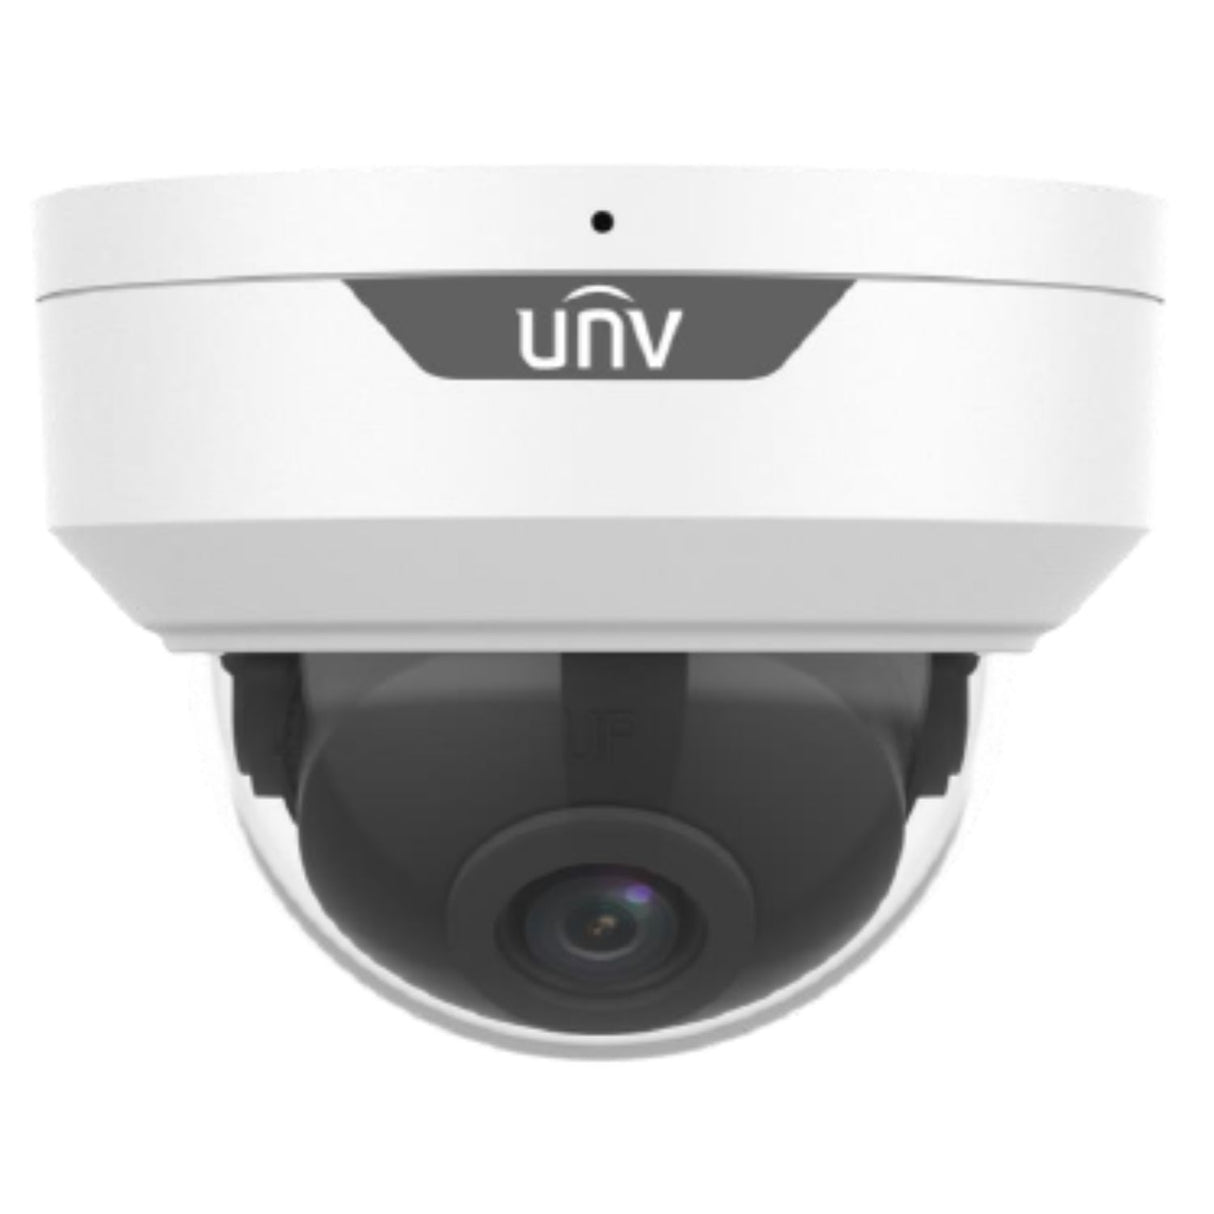 Uniview Security Camera: 6MP HD Vandal-resistant IR Fixed Dome Network Camera - IPC326LE-ADF28K-G